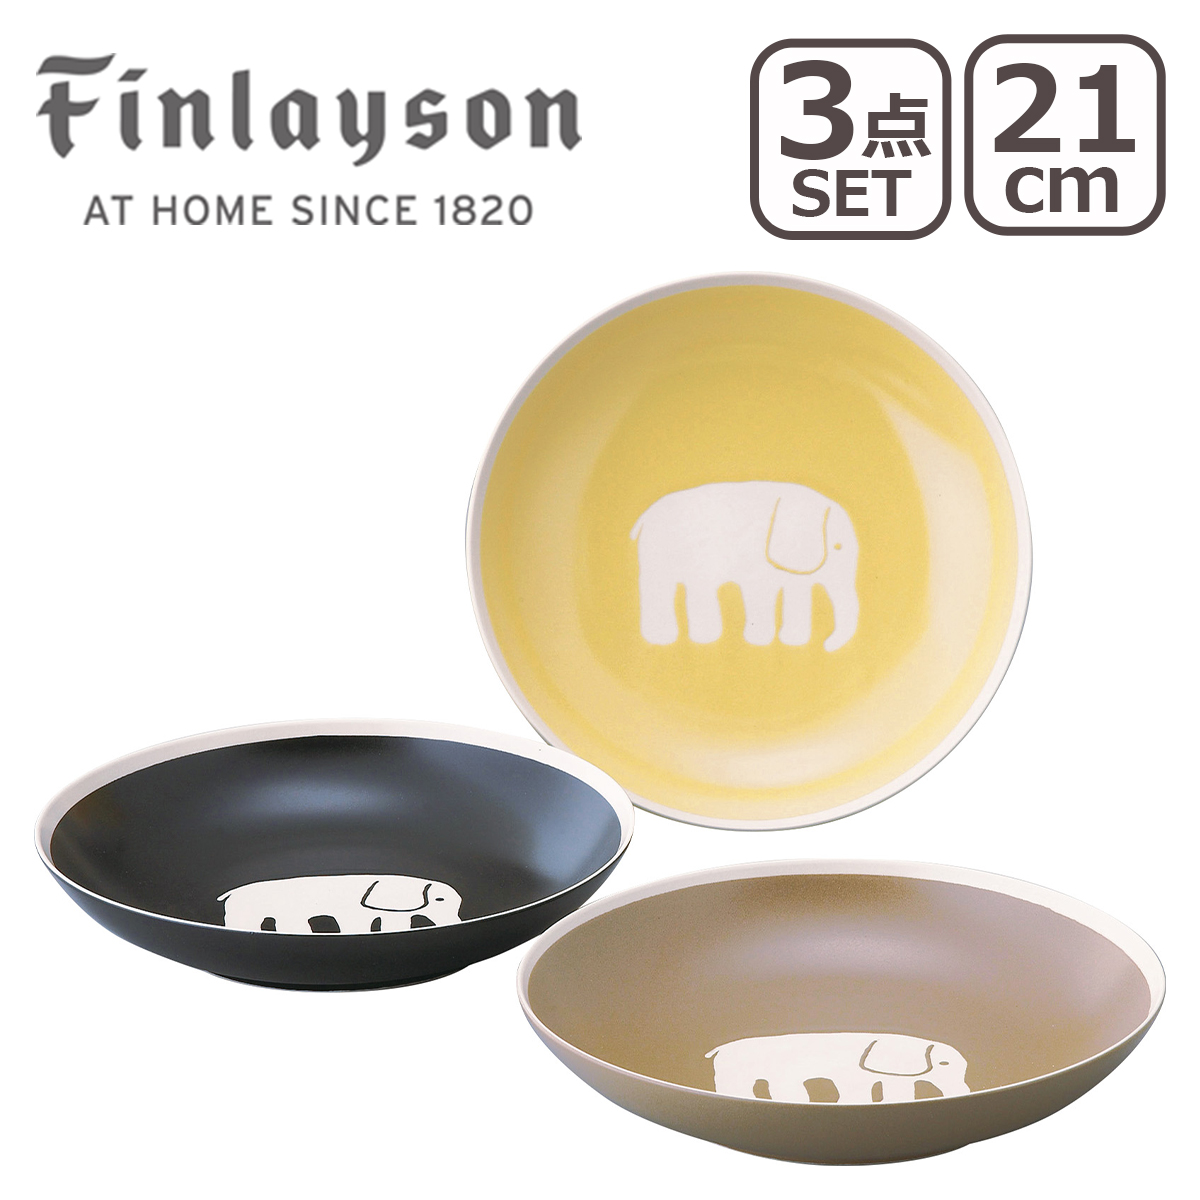 Finlayson（フィンレイソン）トリオパスタプレートセット FIN140-139 21cmパスタプレート 3点セット エレファンティ リサイクルセラミック 日本製｜daily-3